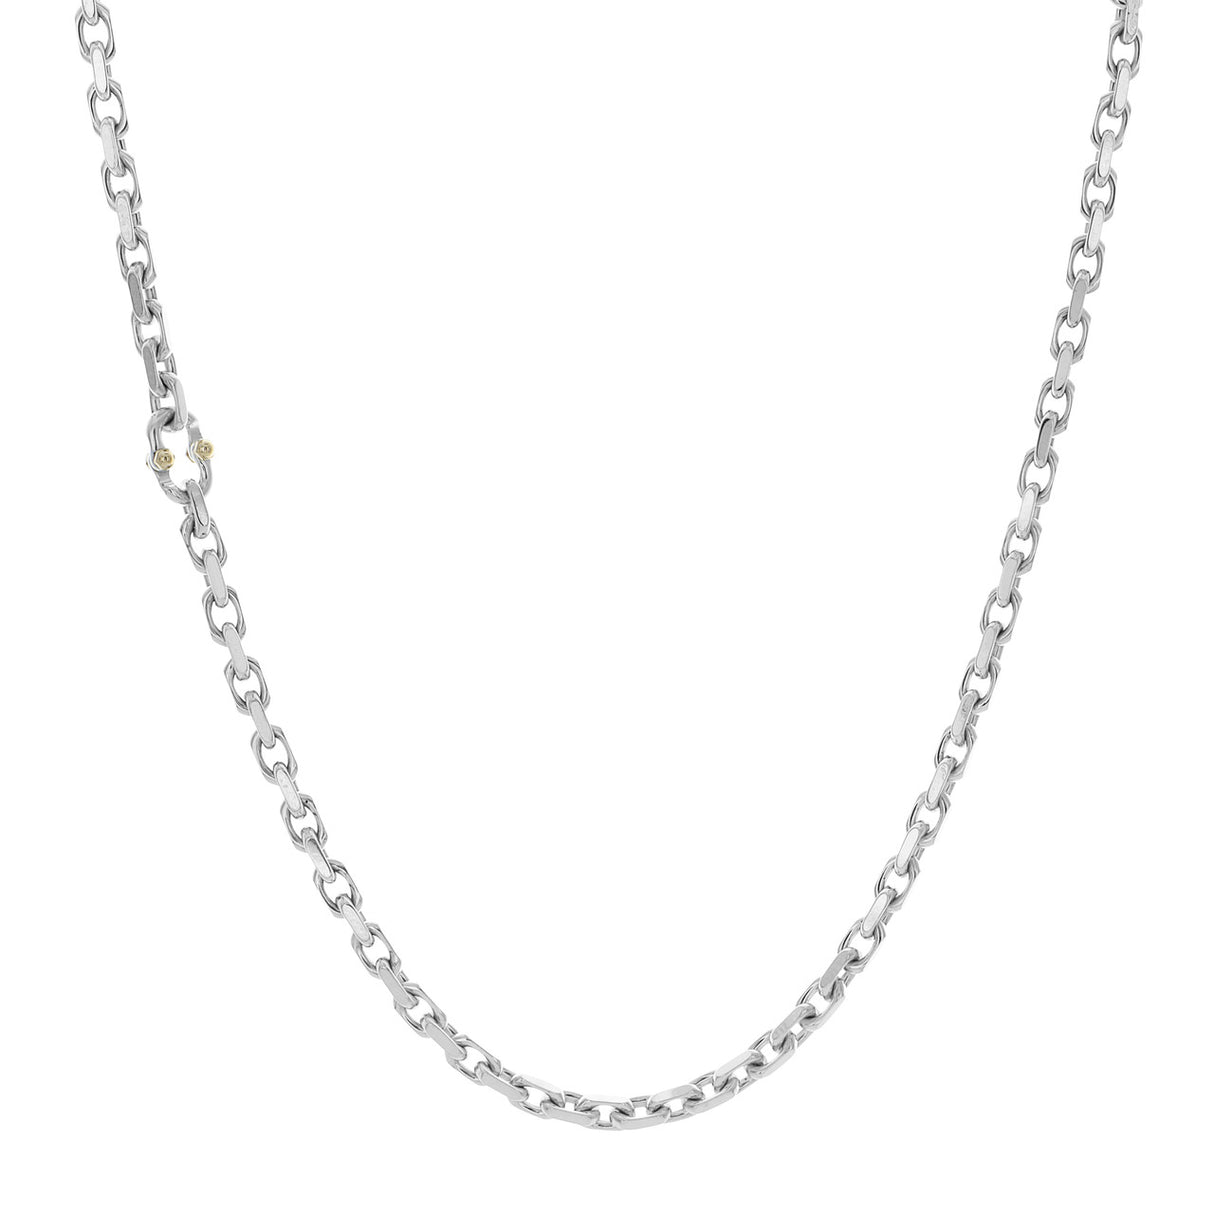 Tiffany & Co. Sterling Silver Makers Chain Necklace